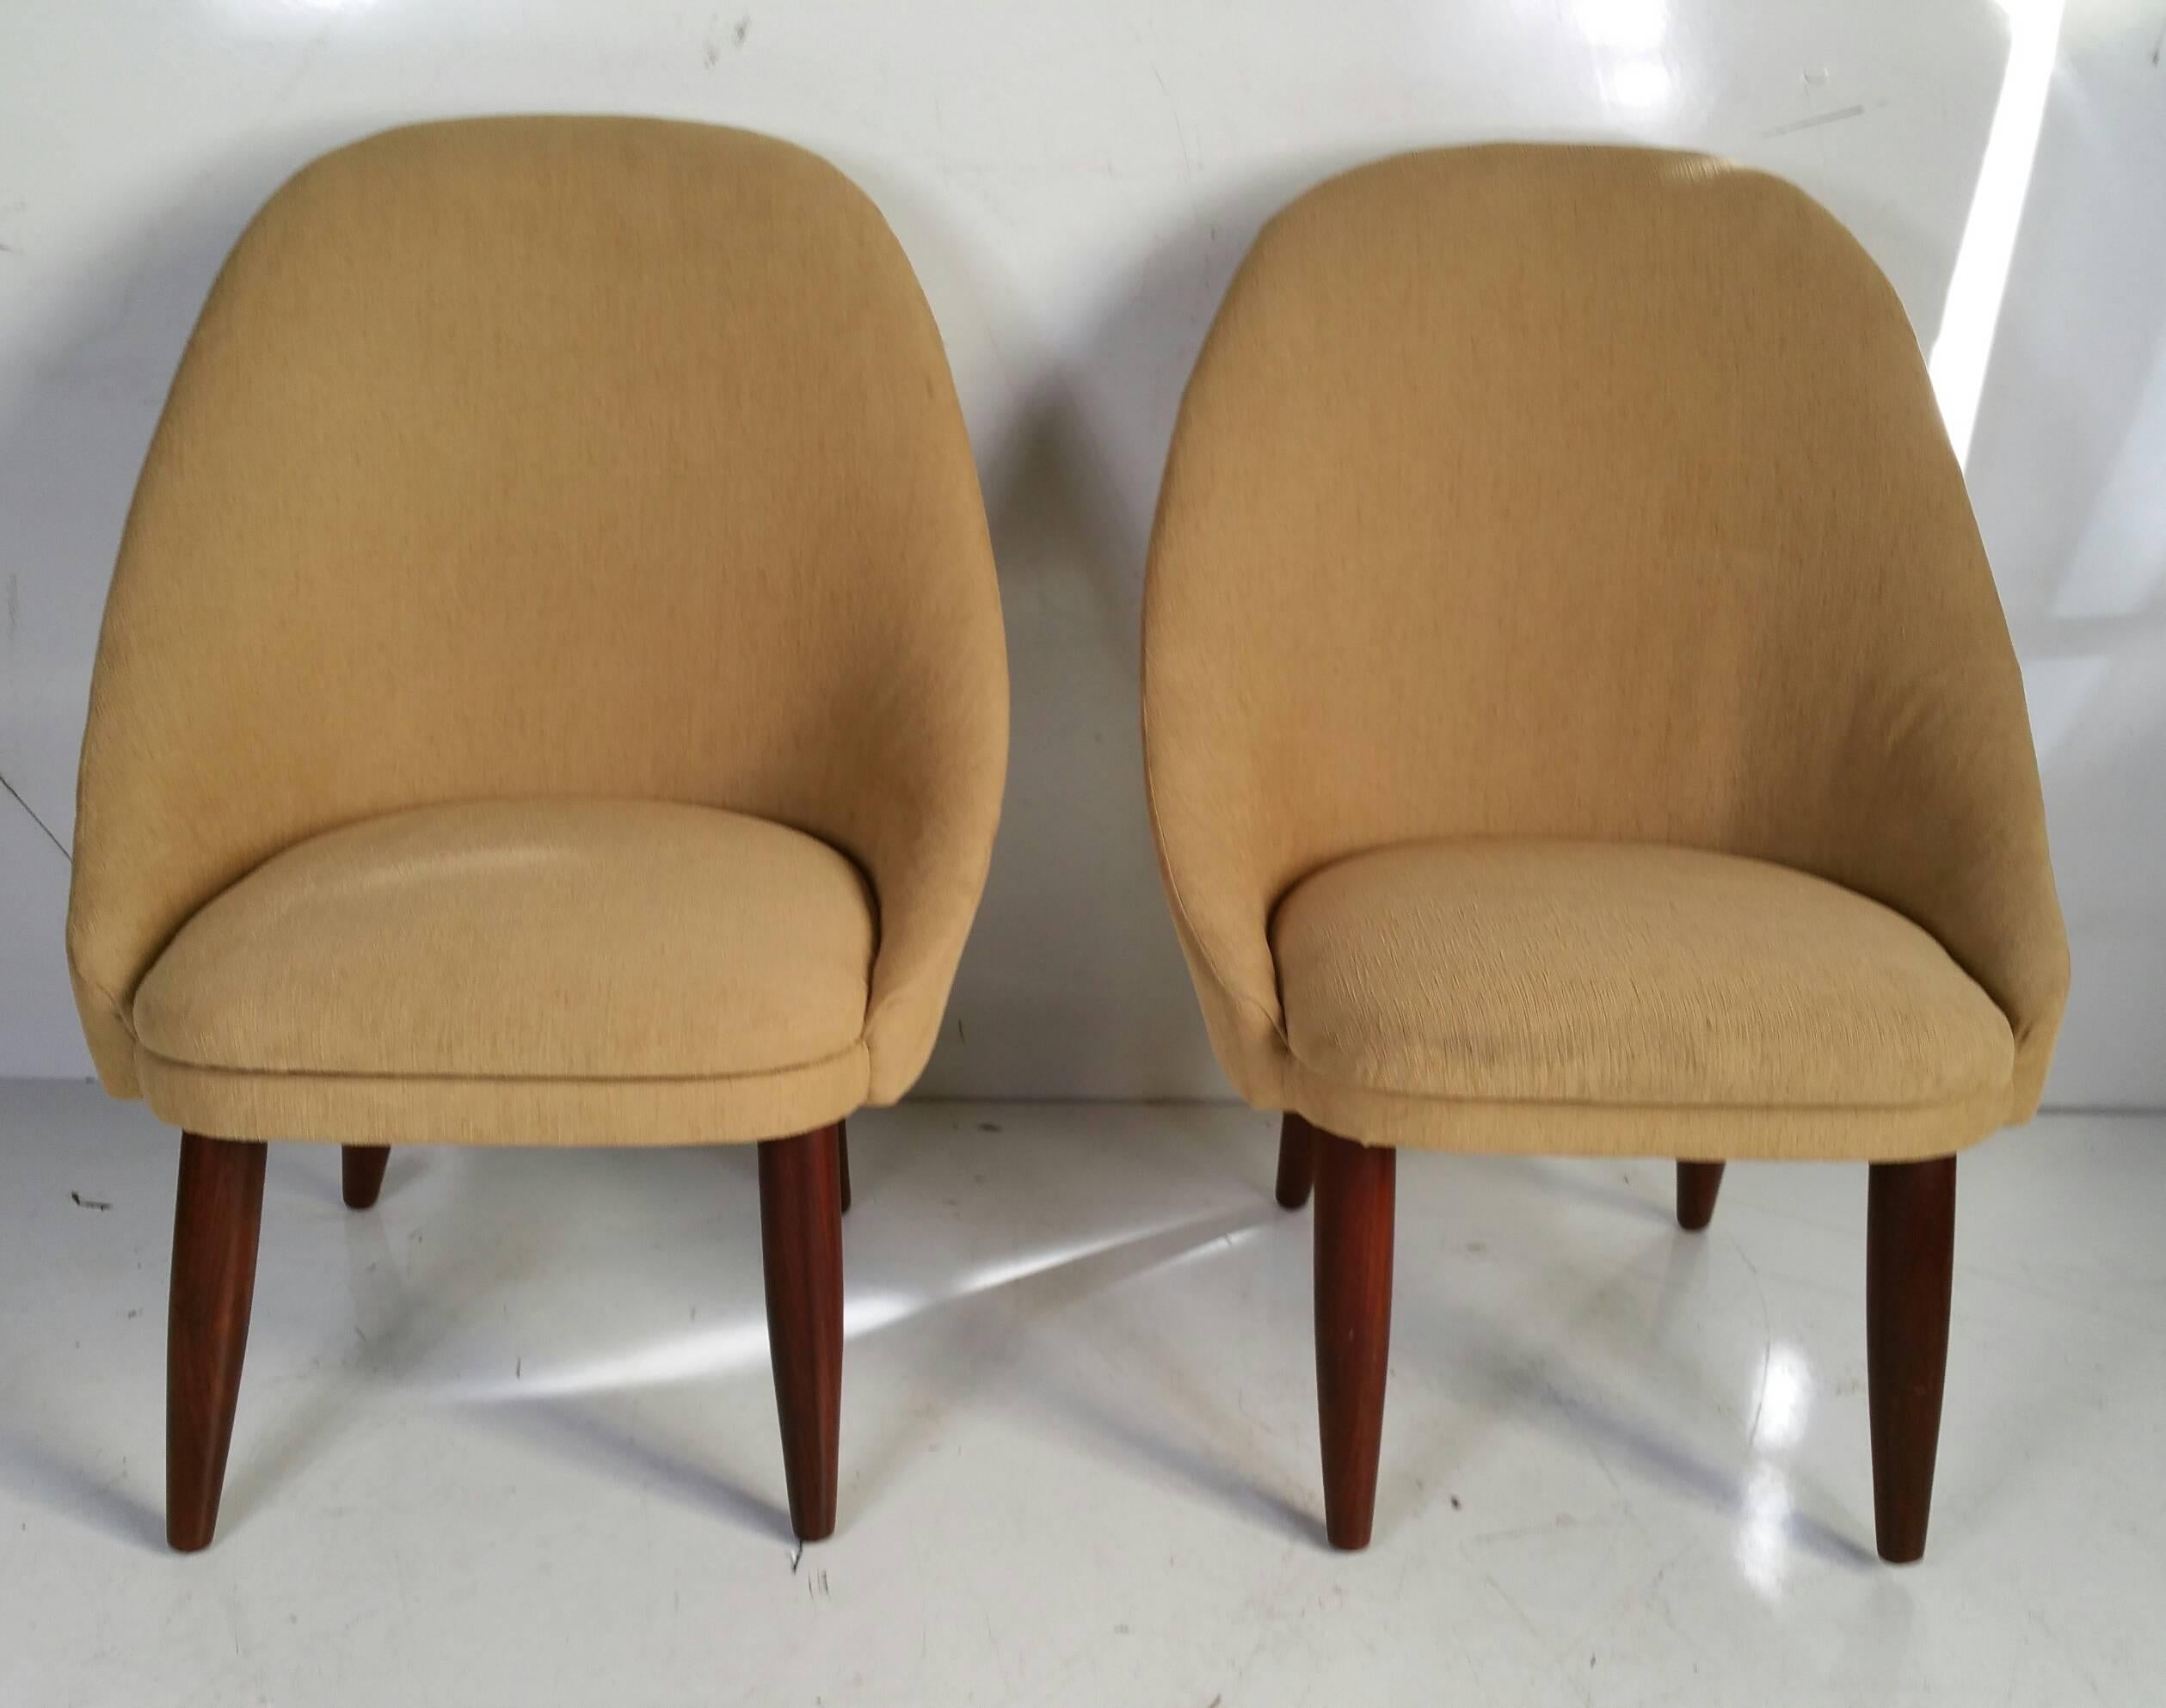 Stylized pair of slipper chairs designed by Ejvind Johansson, made in Denmark, recently reupholstered, solid walnut turned legs. Extremely comfortable, great proportions.